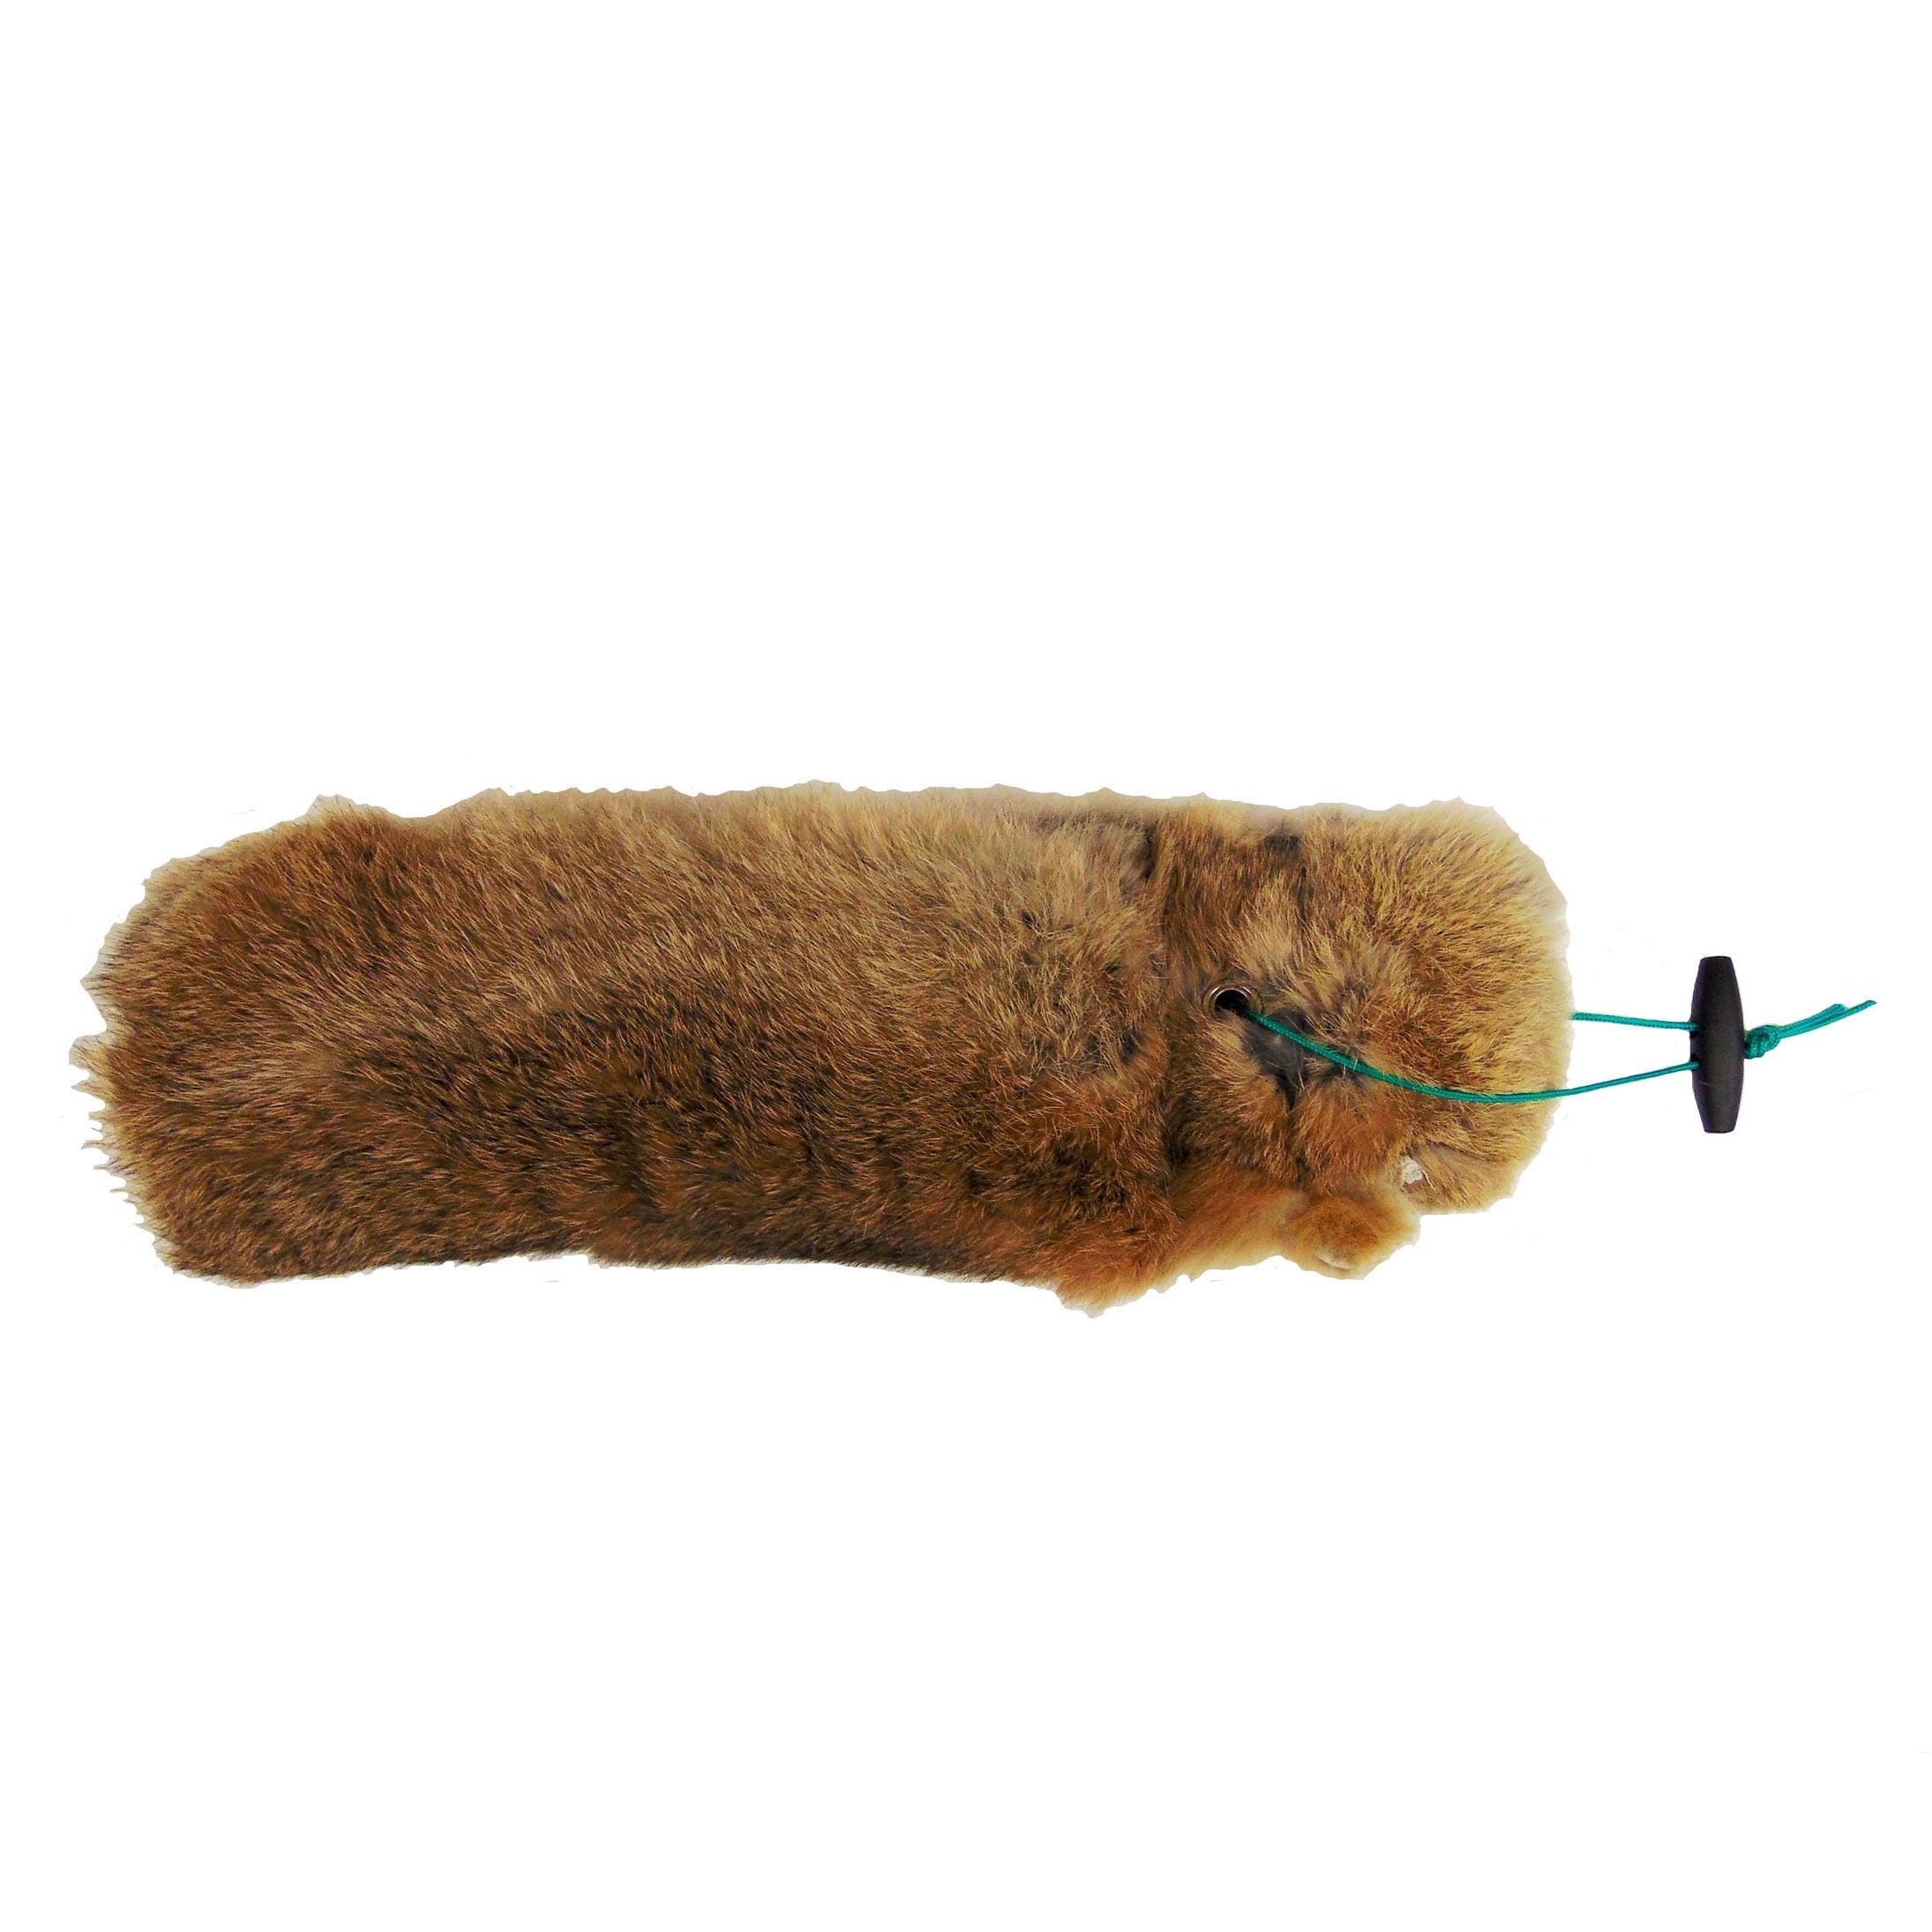 SPORTING SAINT 2 lb Rabbit Dummy With Throwing Toggle